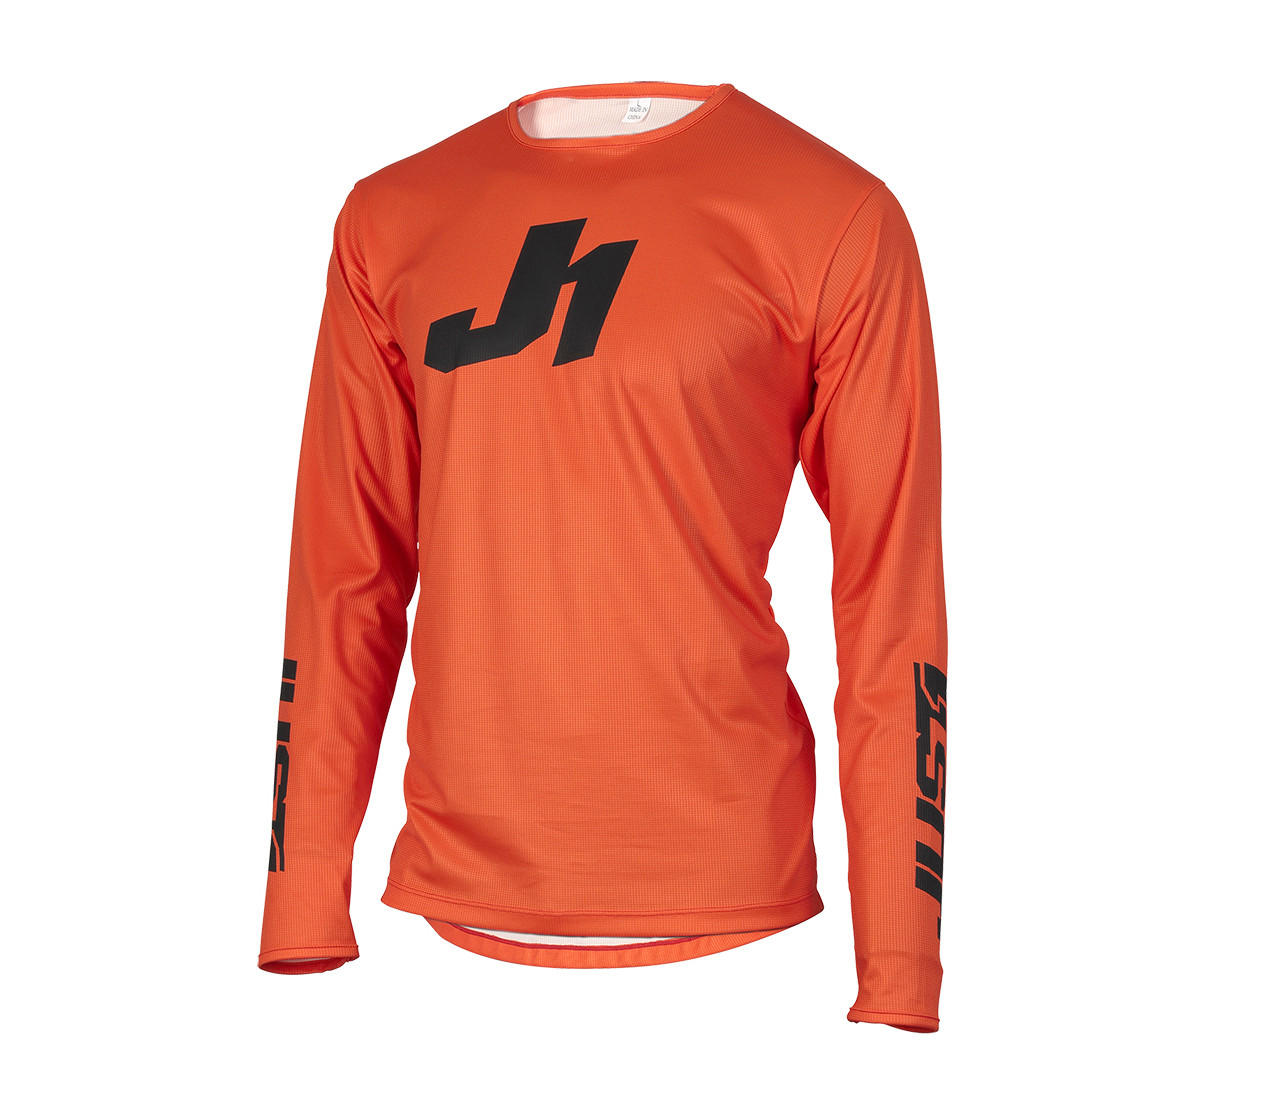 JUST1 JERSEY J-ESSENTIAL YOUTH SOLID ORANGE